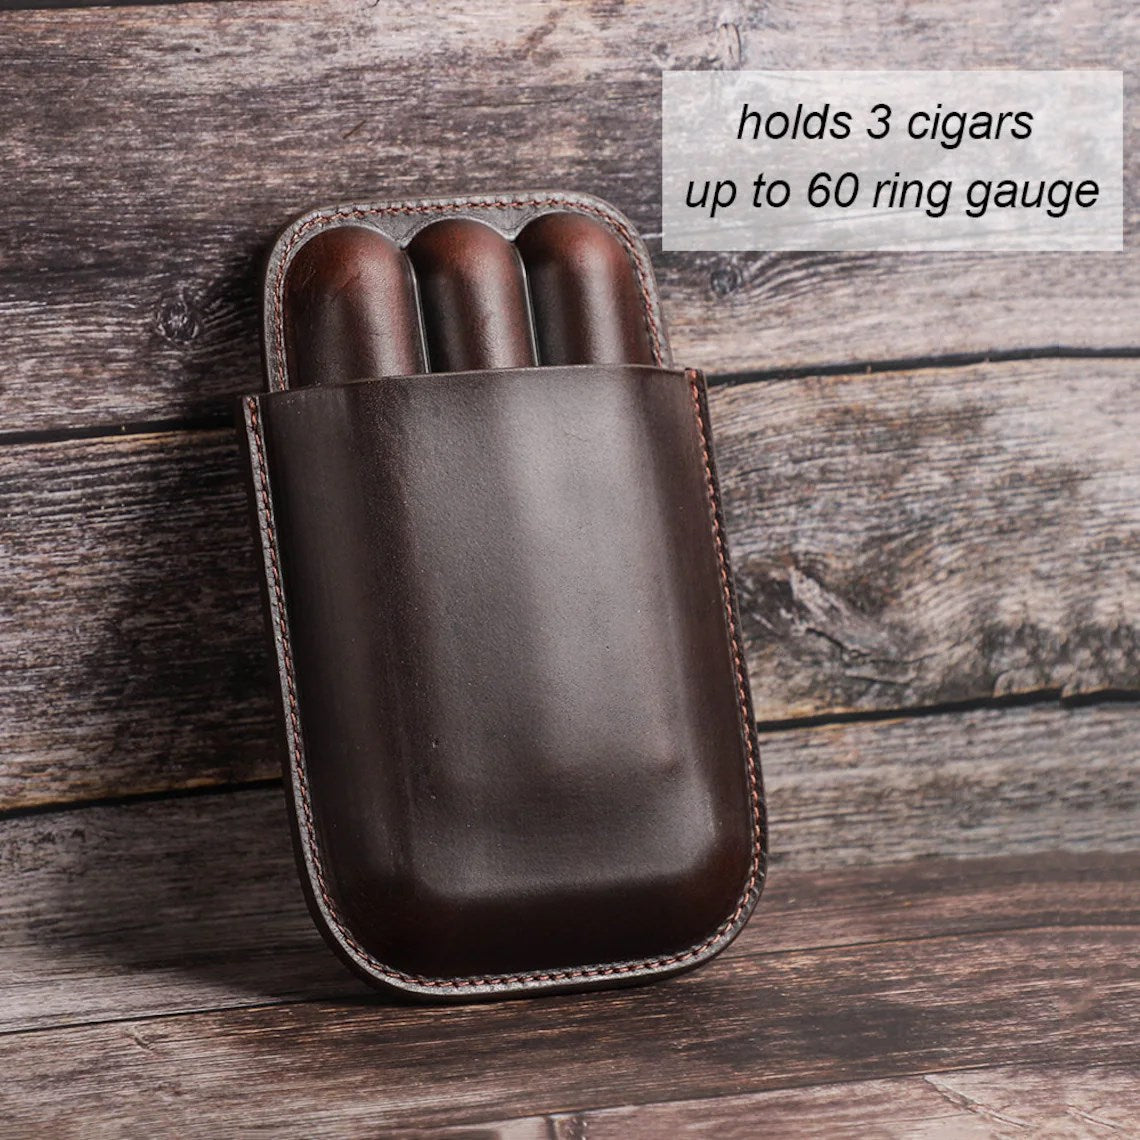 Custom Engraved Leather Cigar Carrying Case - Holds 2 Cigars - Tempe Trophy